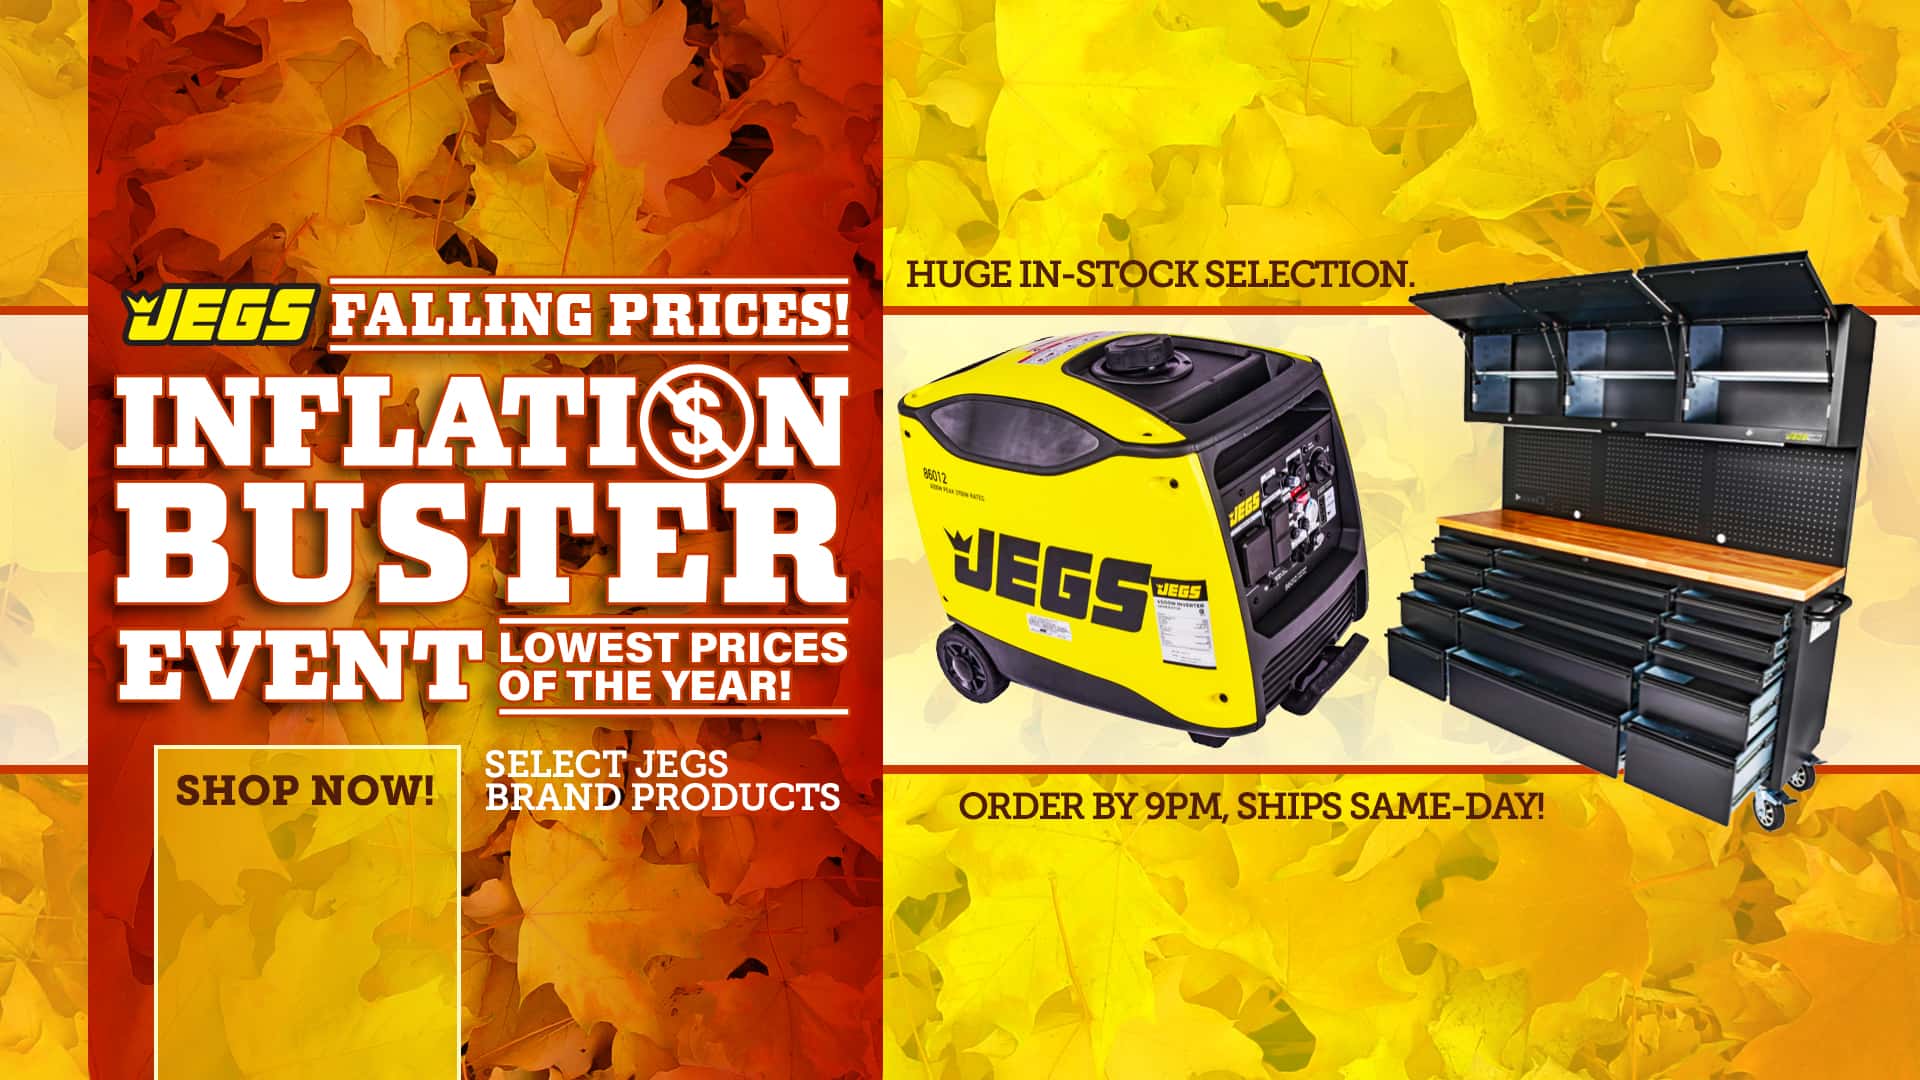 JEGS Falling Prices! Inflation Buster Event! Lowest Price of the Year